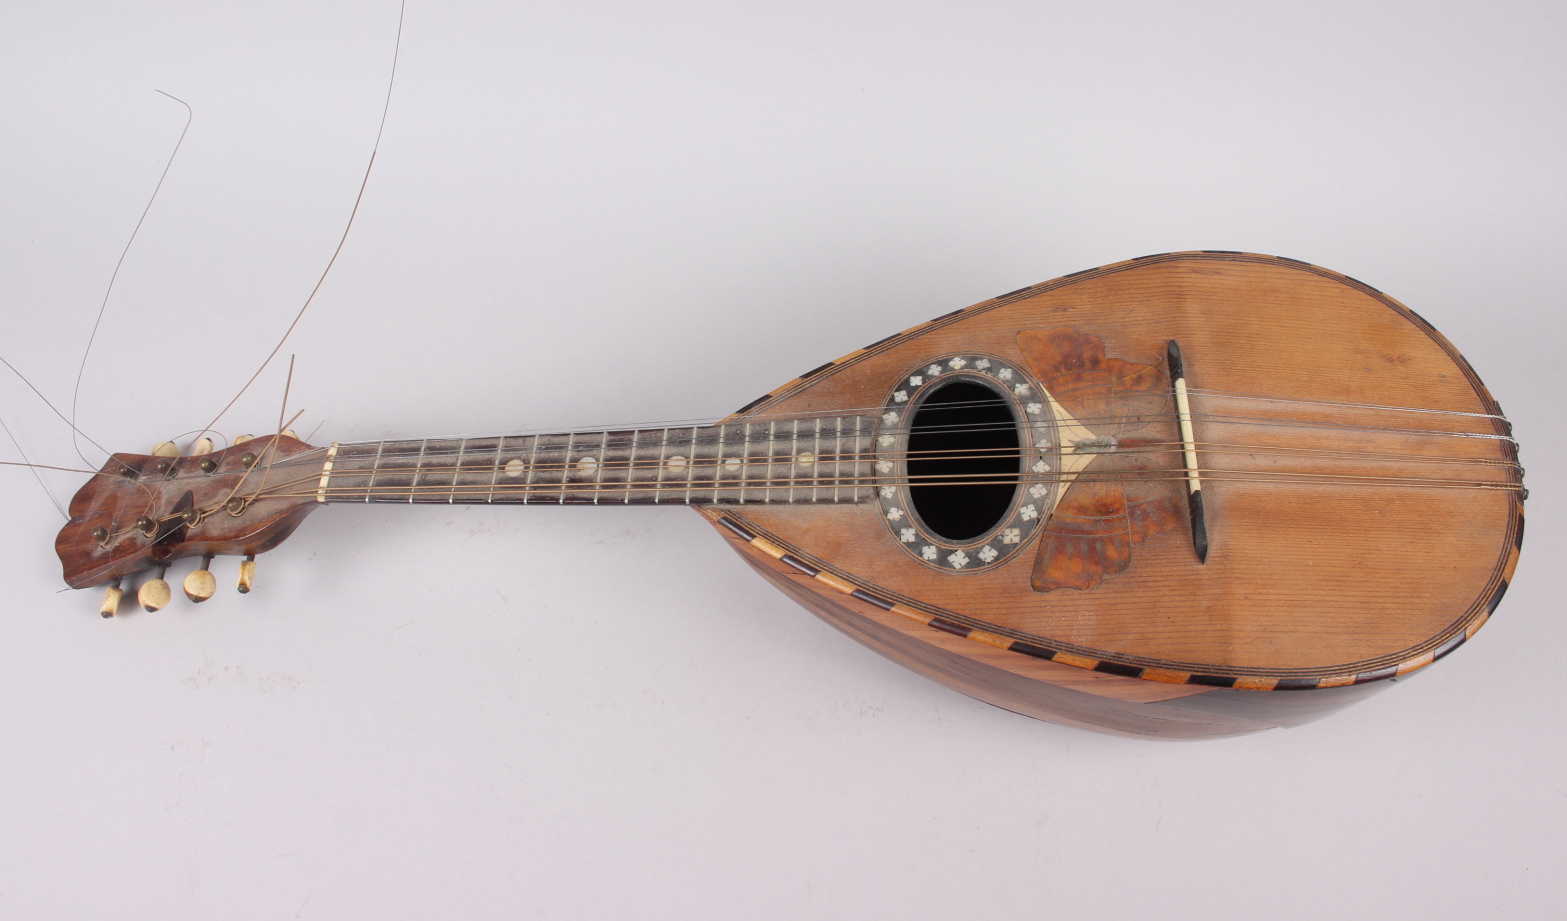 A 19th century Stridente rosewood mandolin, face decorated mother-of-pearl inlay and inlaid